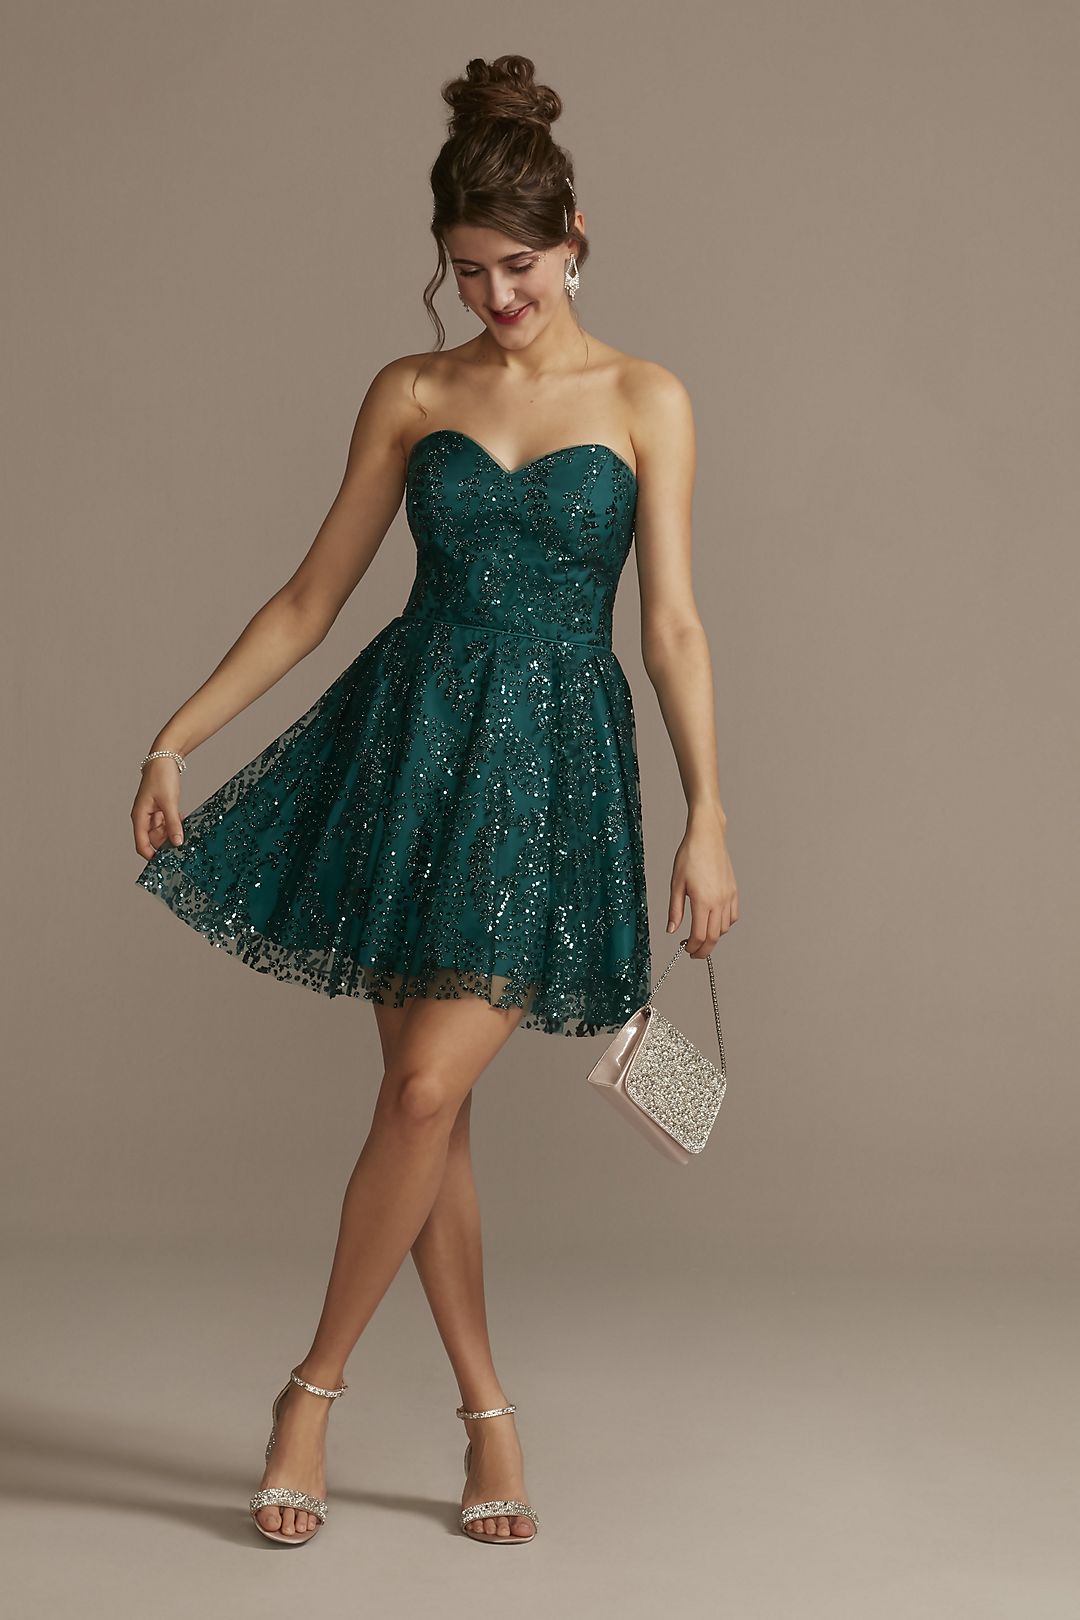 Lovely Day Fashion Sequin Bow Strapless Mini Dress